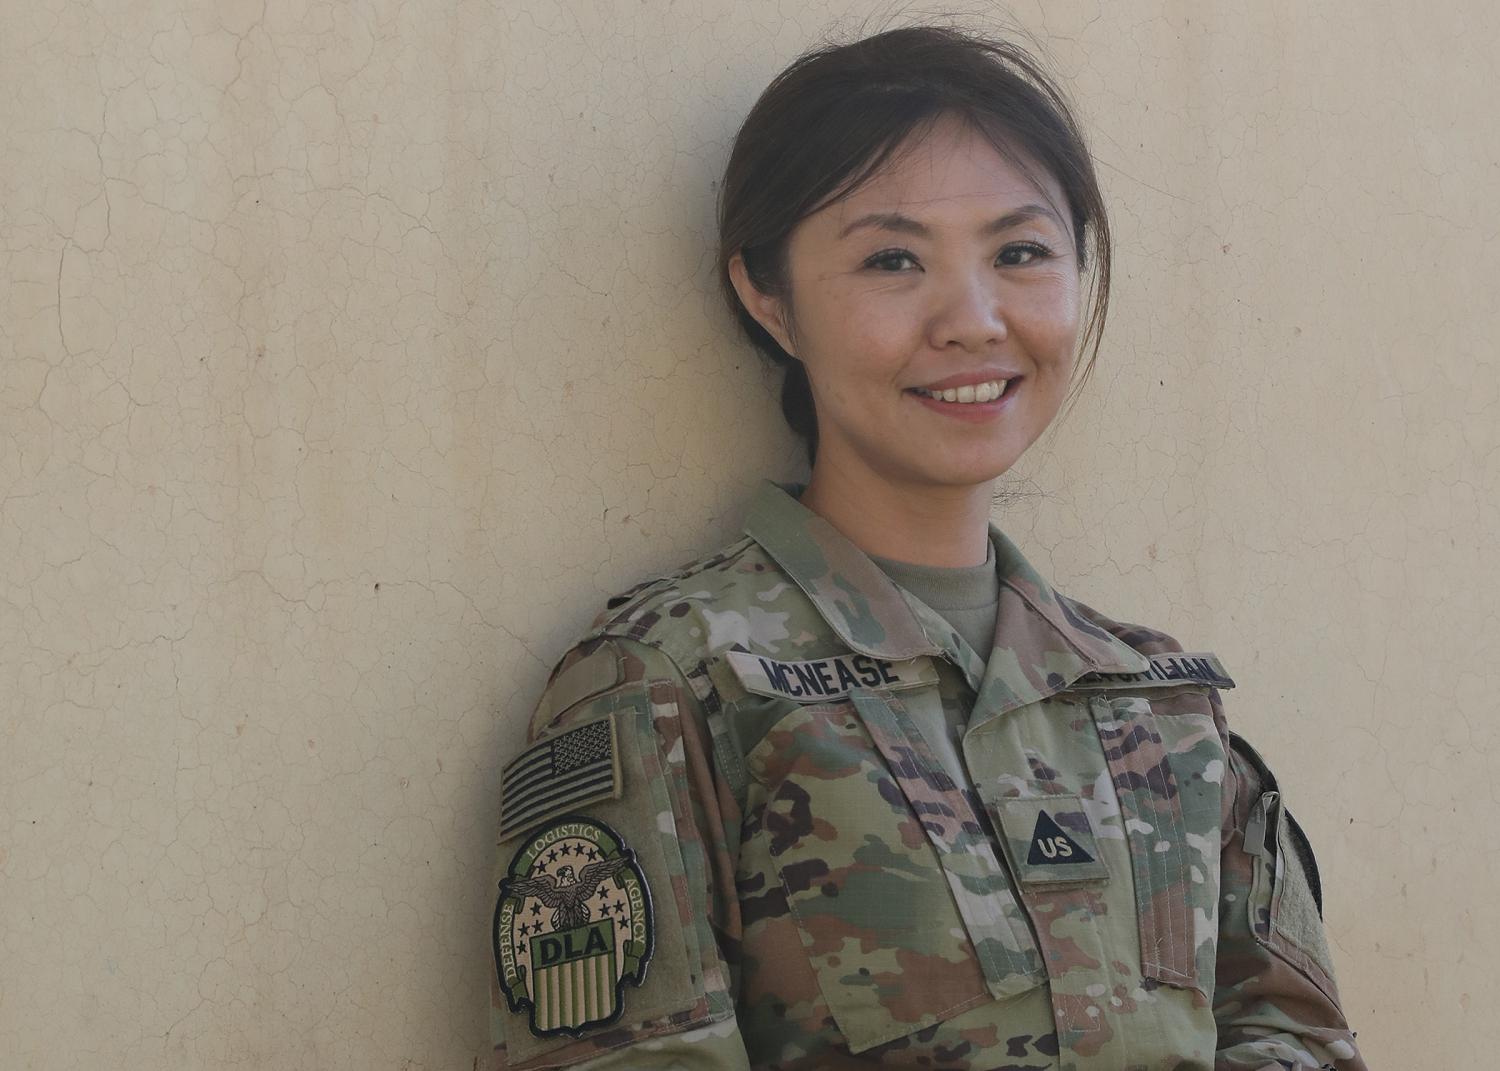 Defense Logistics Agency Civilian Gee Hyun McNease, deployed as the deputy commander of the DLA Support Team-Kuwait at Camp Arifjan, Kuwait, is a native of the Republic of Korea. McNease said her first consciousness of America was from her parents, who were grateful to American Soldiers who liberated her country from the Communists. (U.S. Army photo by Staff Sgt. Neil W. McCabe)